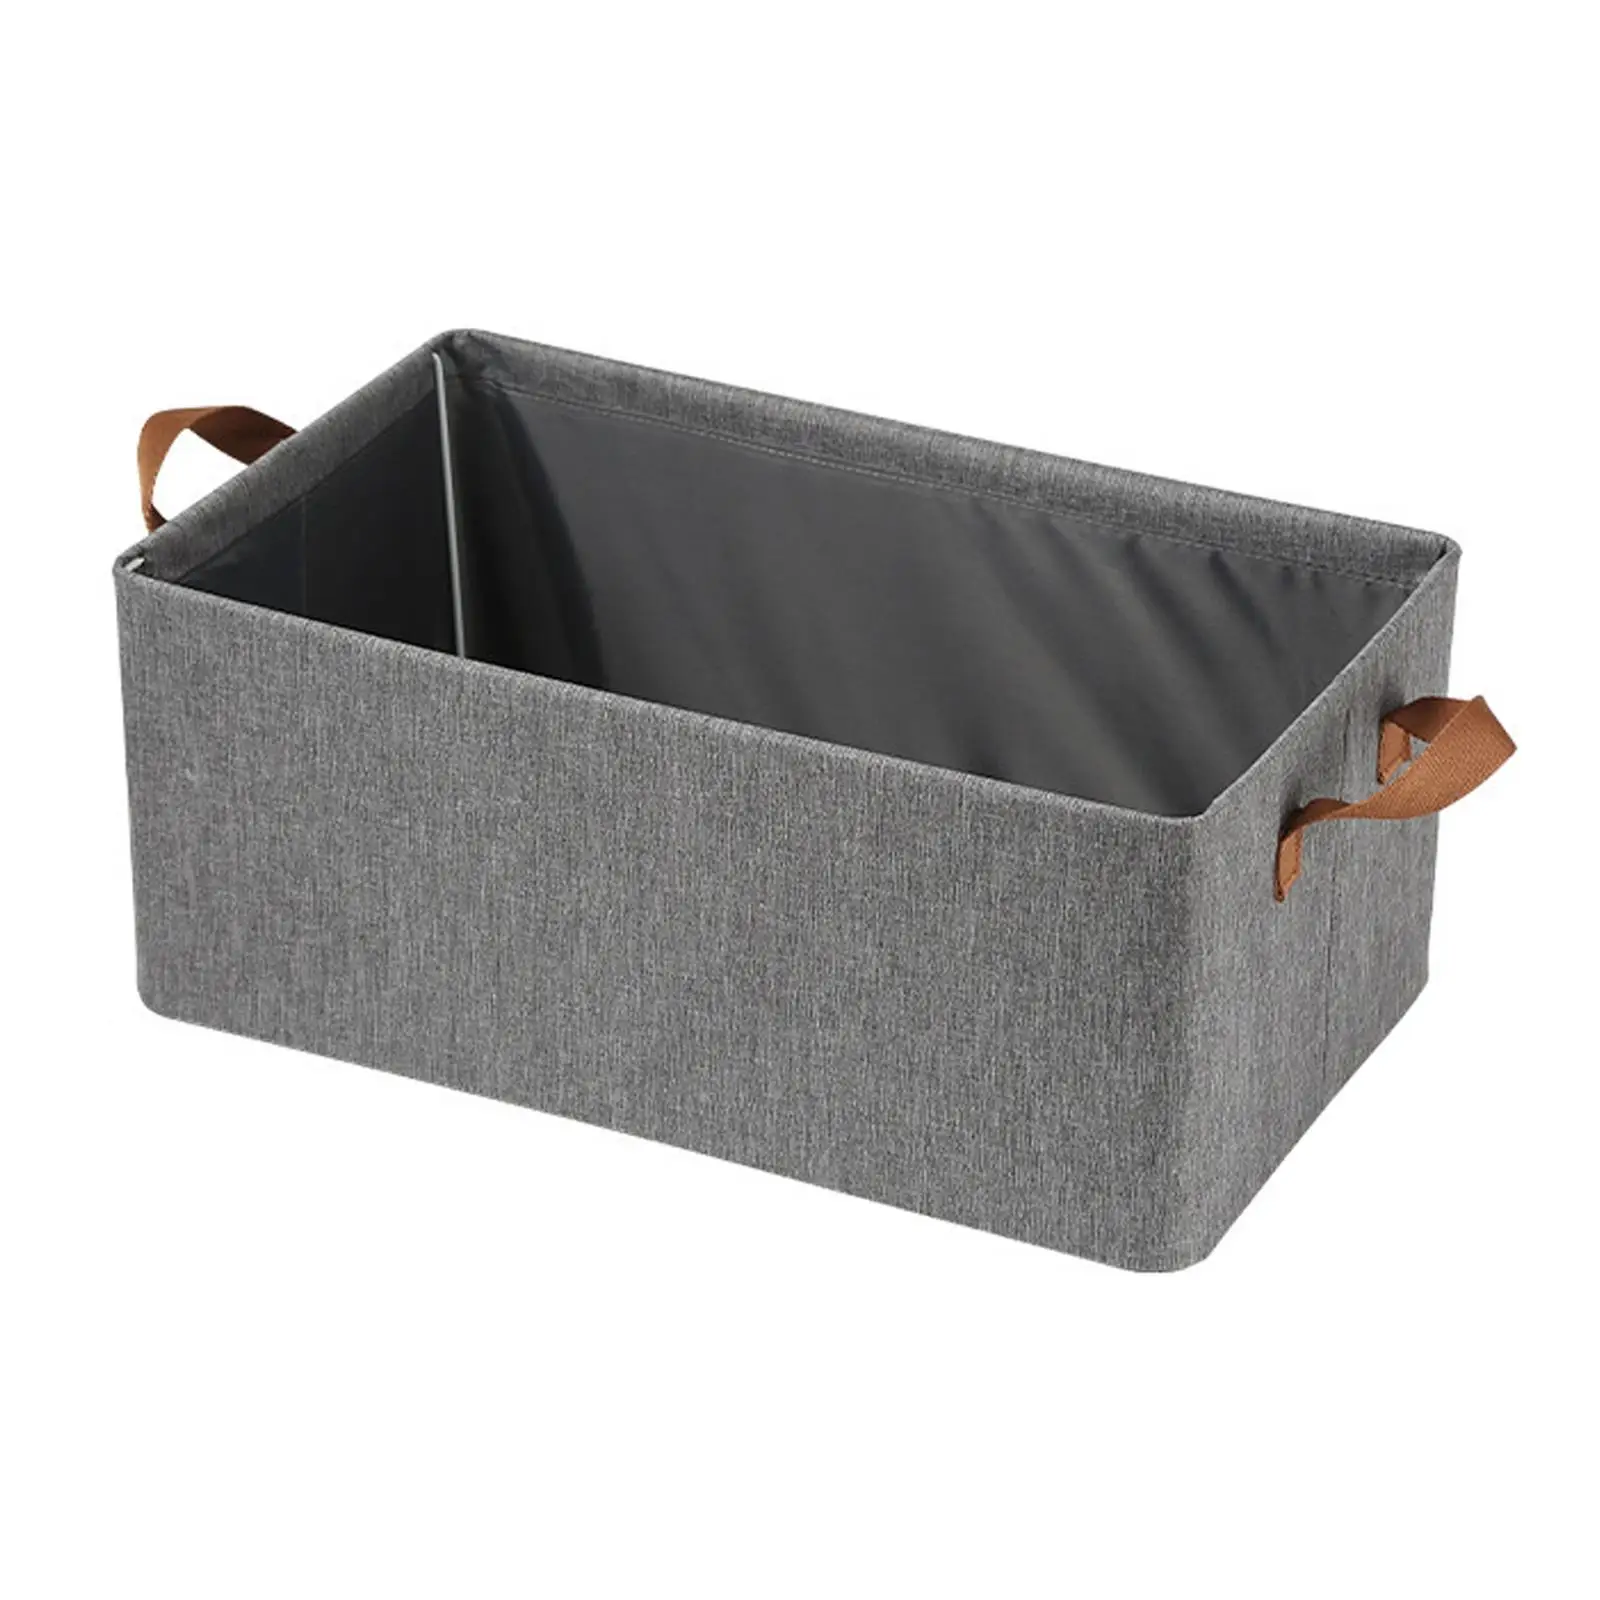 Portable Handy Dirty Clothes Storage Basket Organizer with Handles Folding Storage Basket for Home Office Clothes Closet Shelves